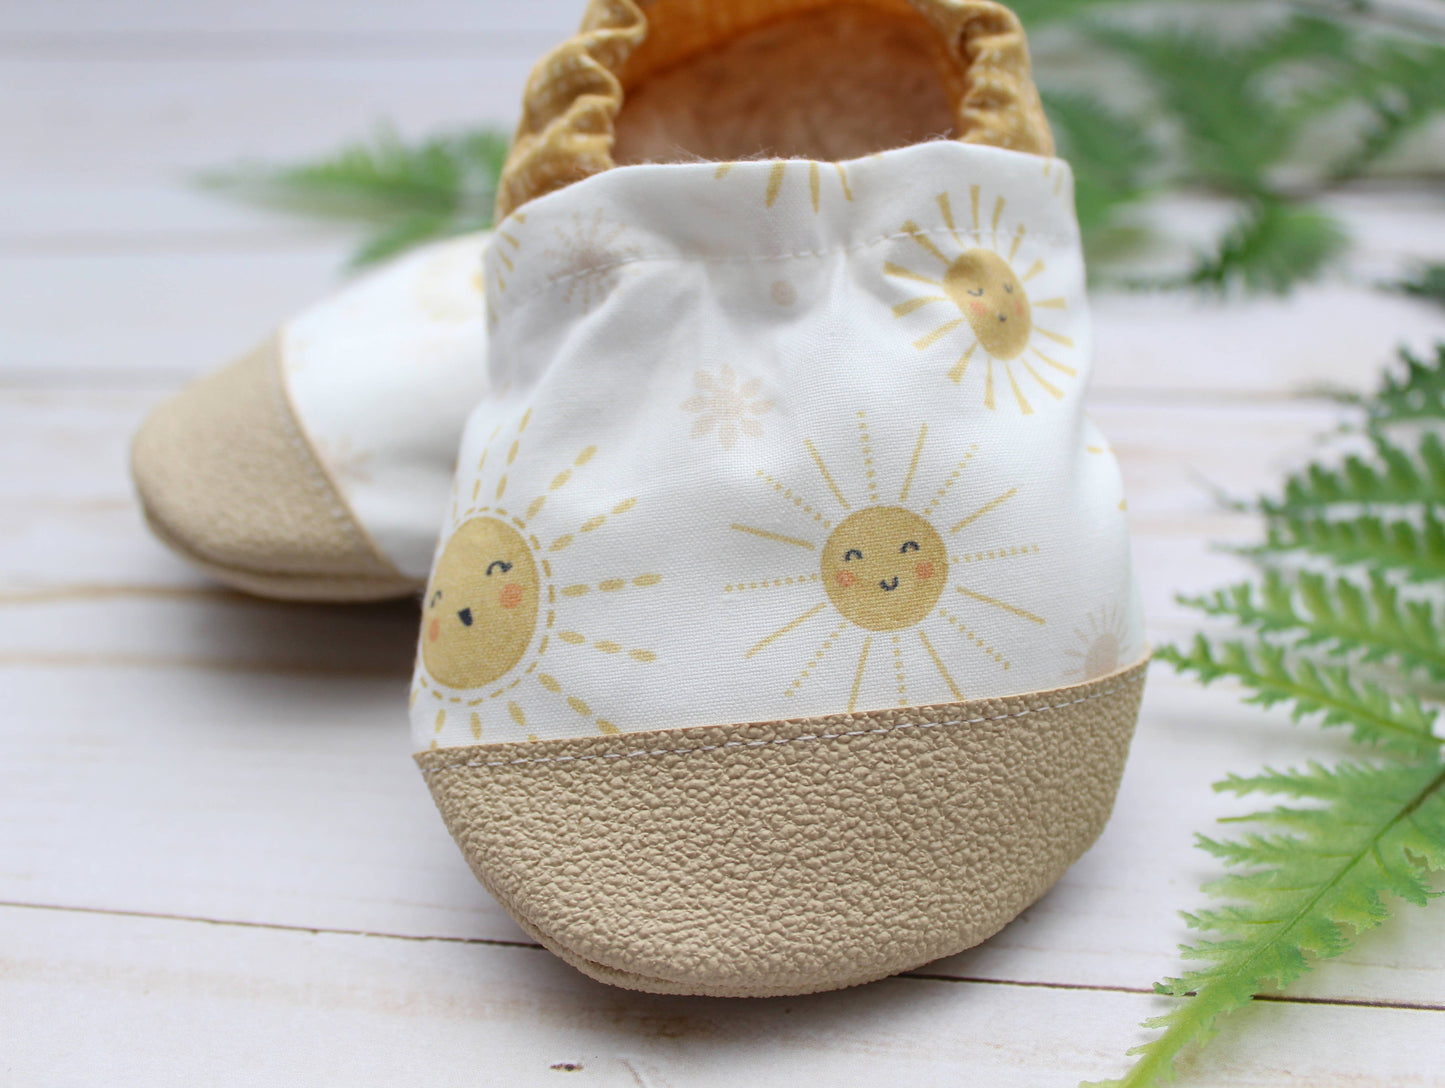 Scooter Booties - Sunshine Baby Shoes: 6 - 12 months